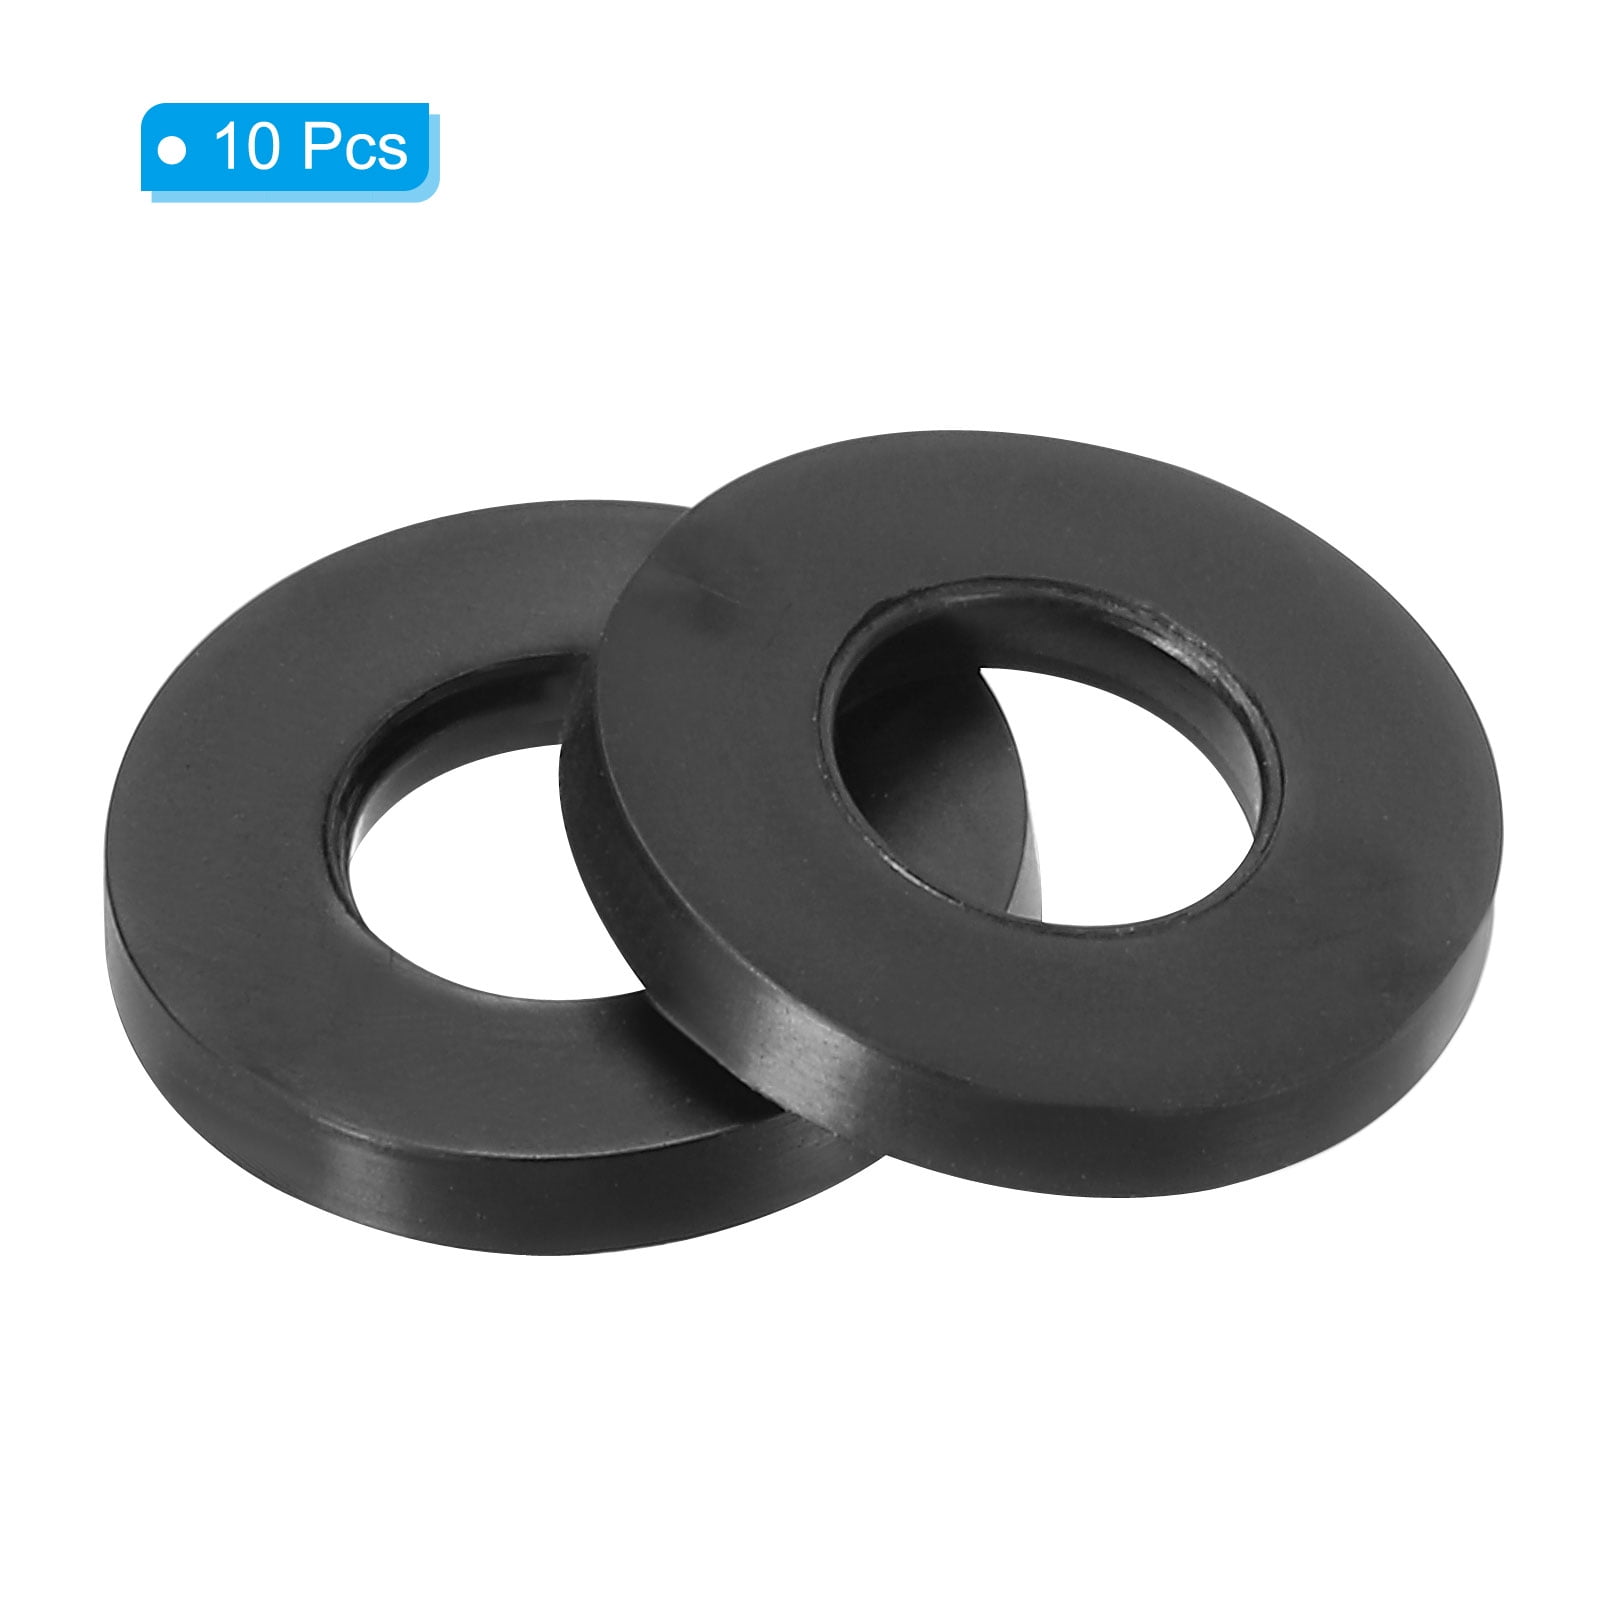 A2 Stainless Steel Flat Washer Gasket Metal Ring Shim ID 1.6-36mm